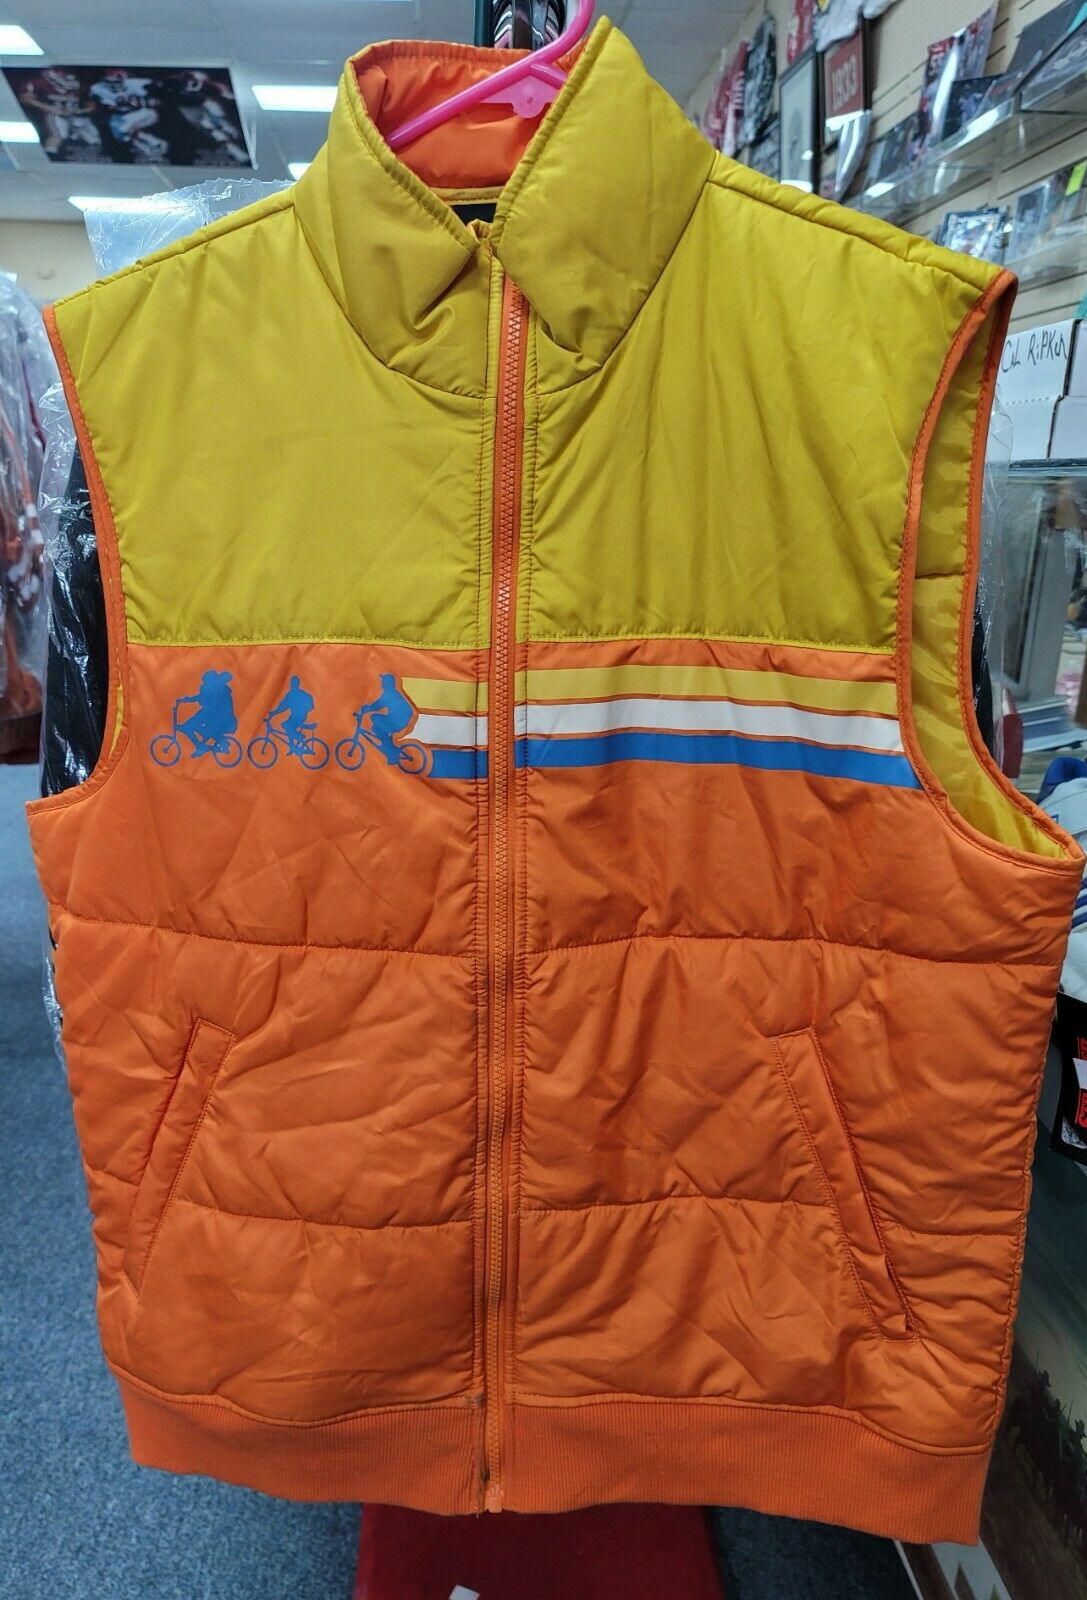 Stranger Things Sleeveless Puffer Vest, Size Large, Orange And Yellow New W/tags